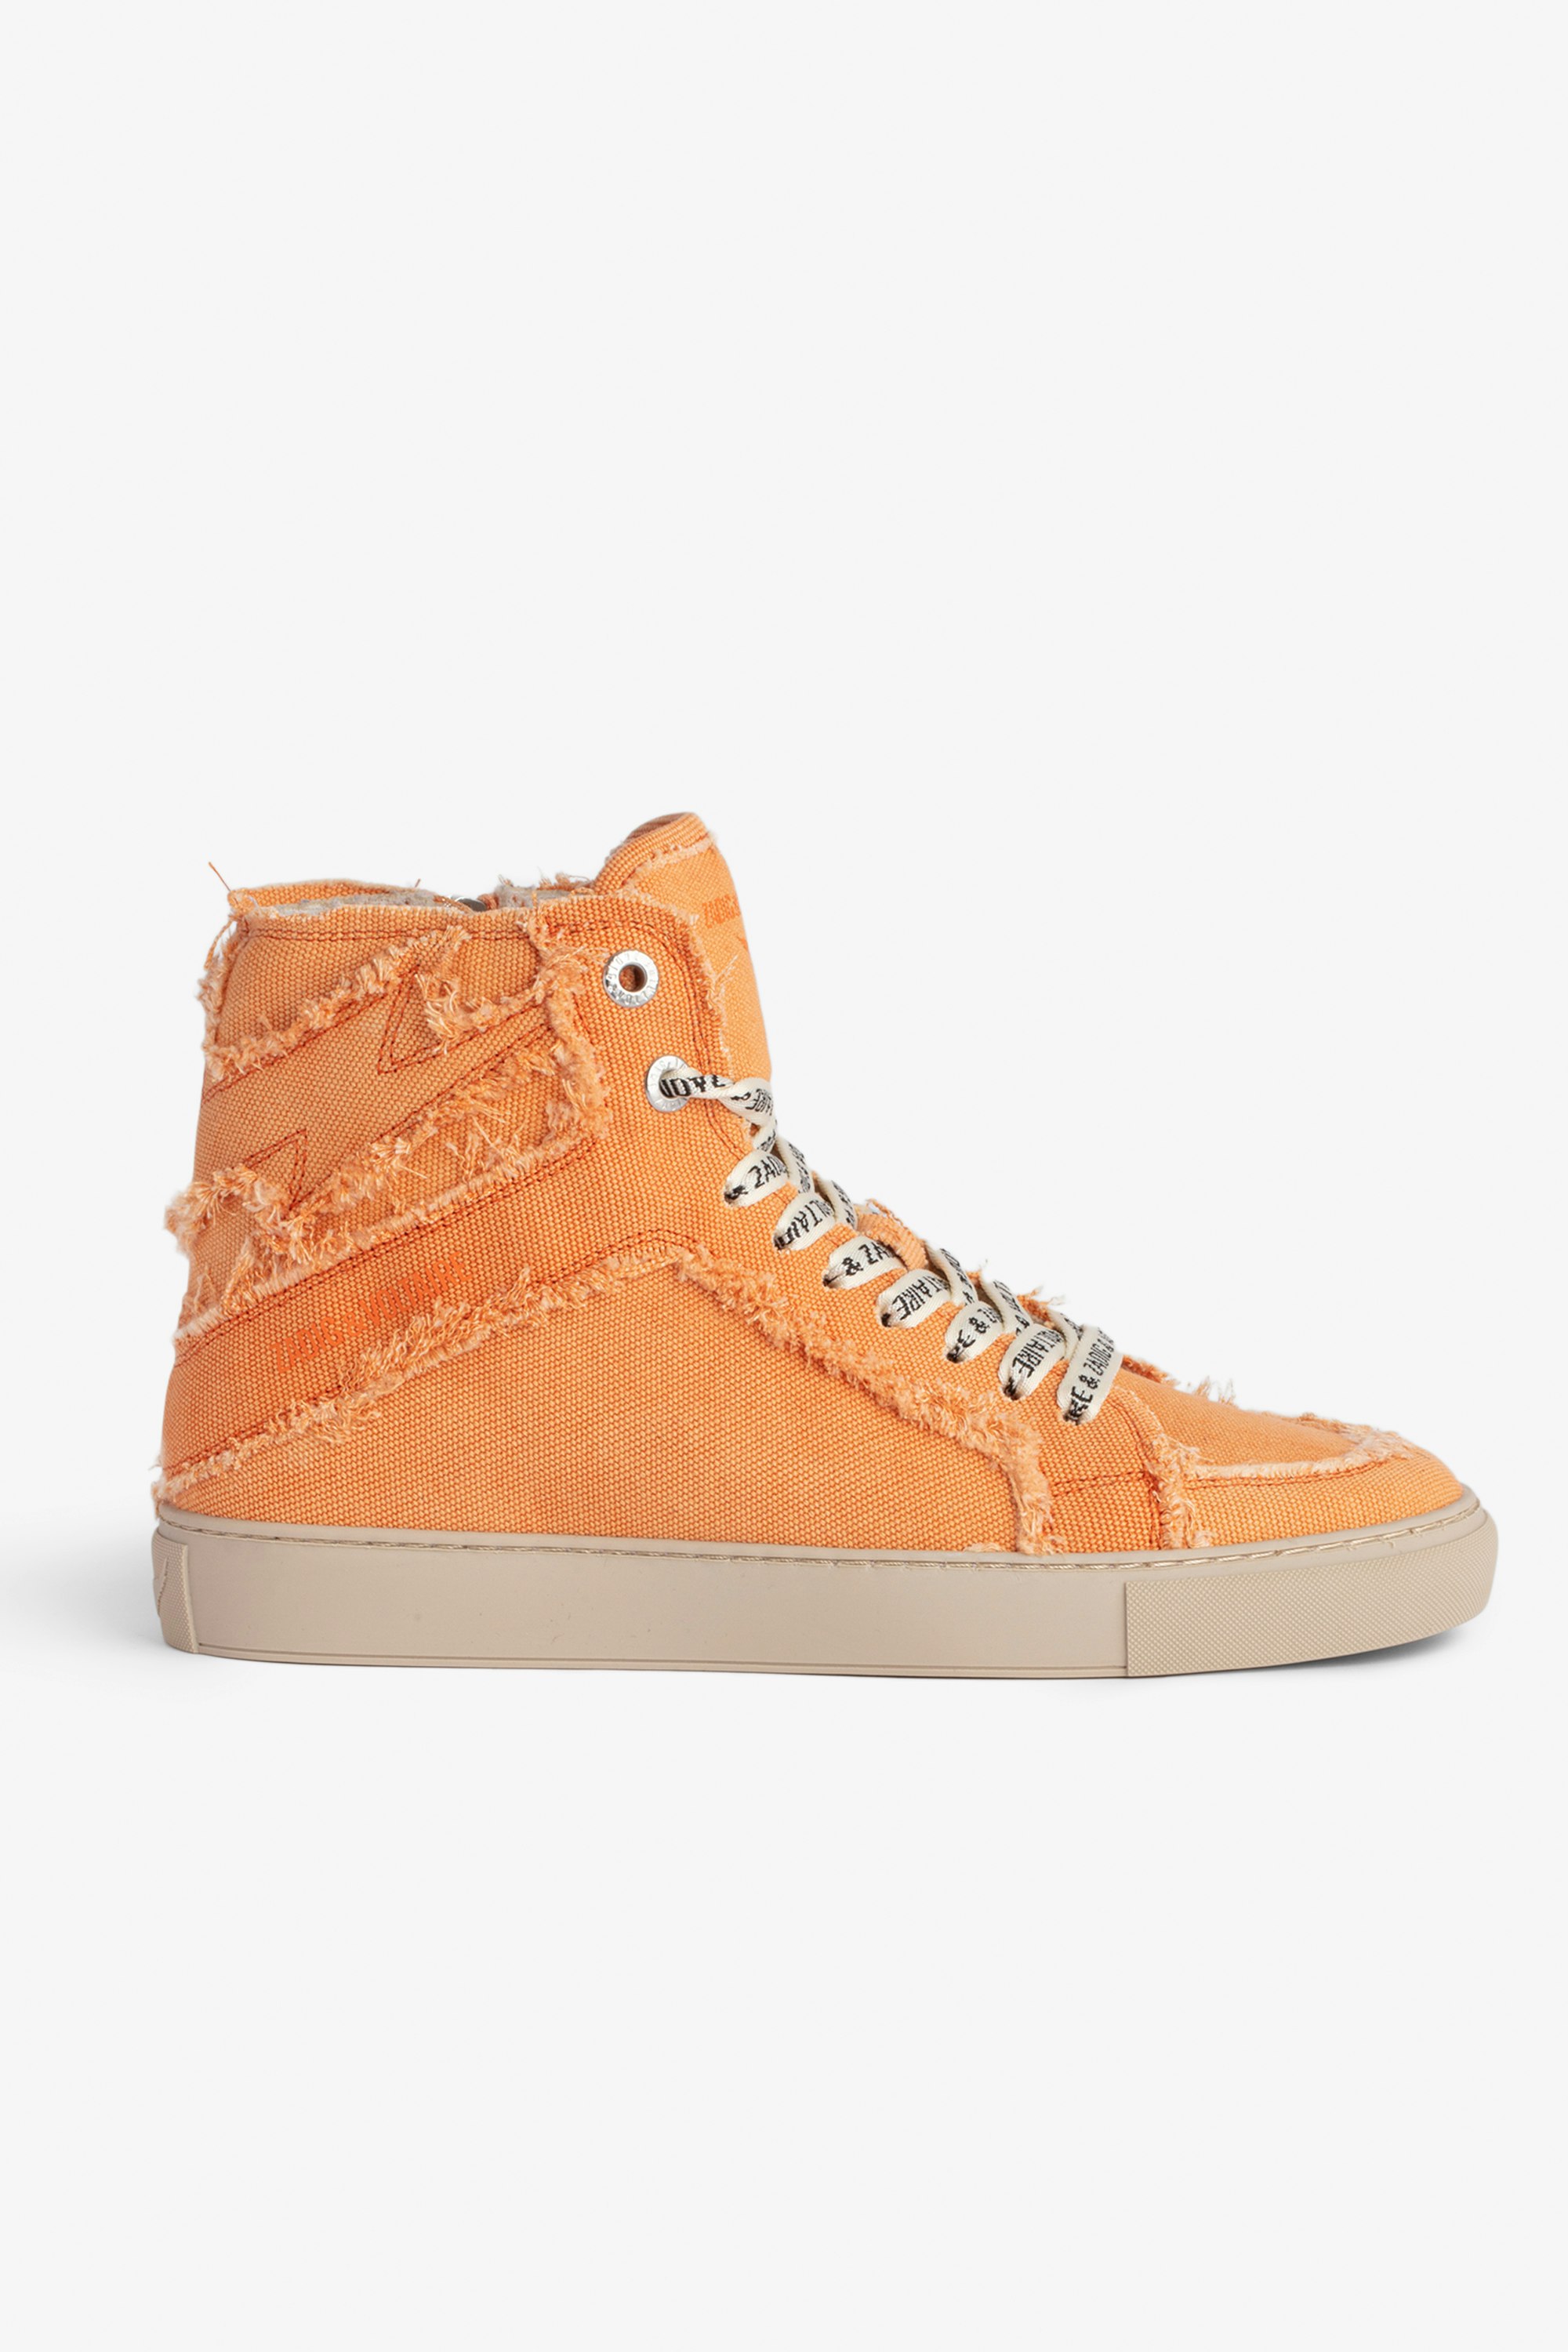 ZV1747 High Flash High-Top Trainers Women's high-top trainers in orange cotton canvas